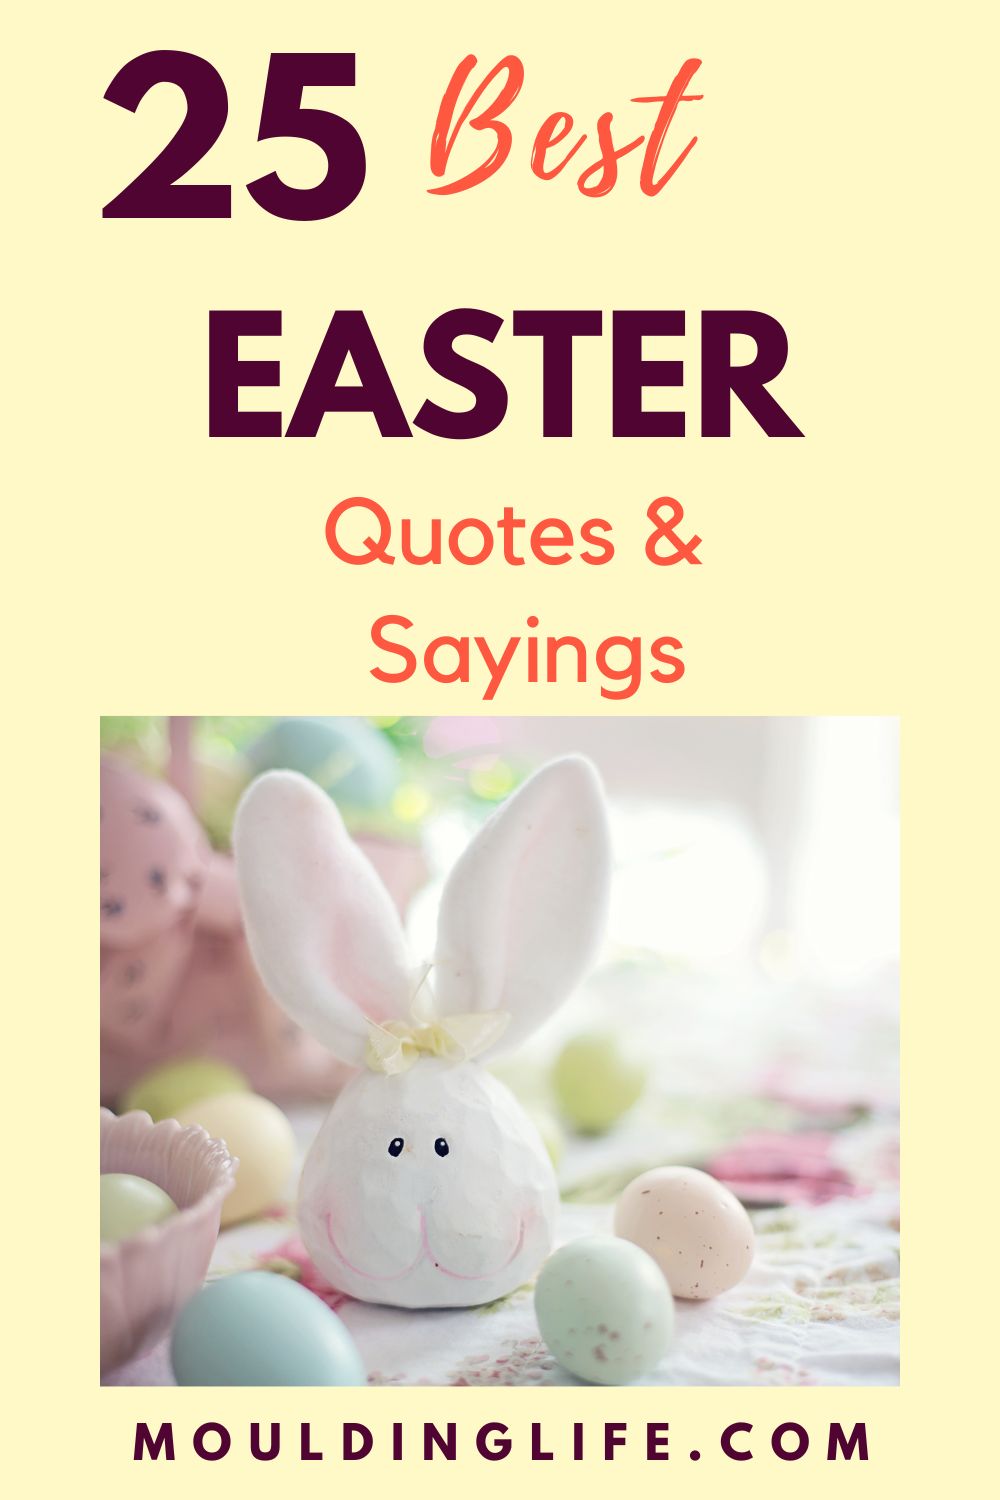 25 Inspiring Easter Quotes and Sayings - Moulding Life